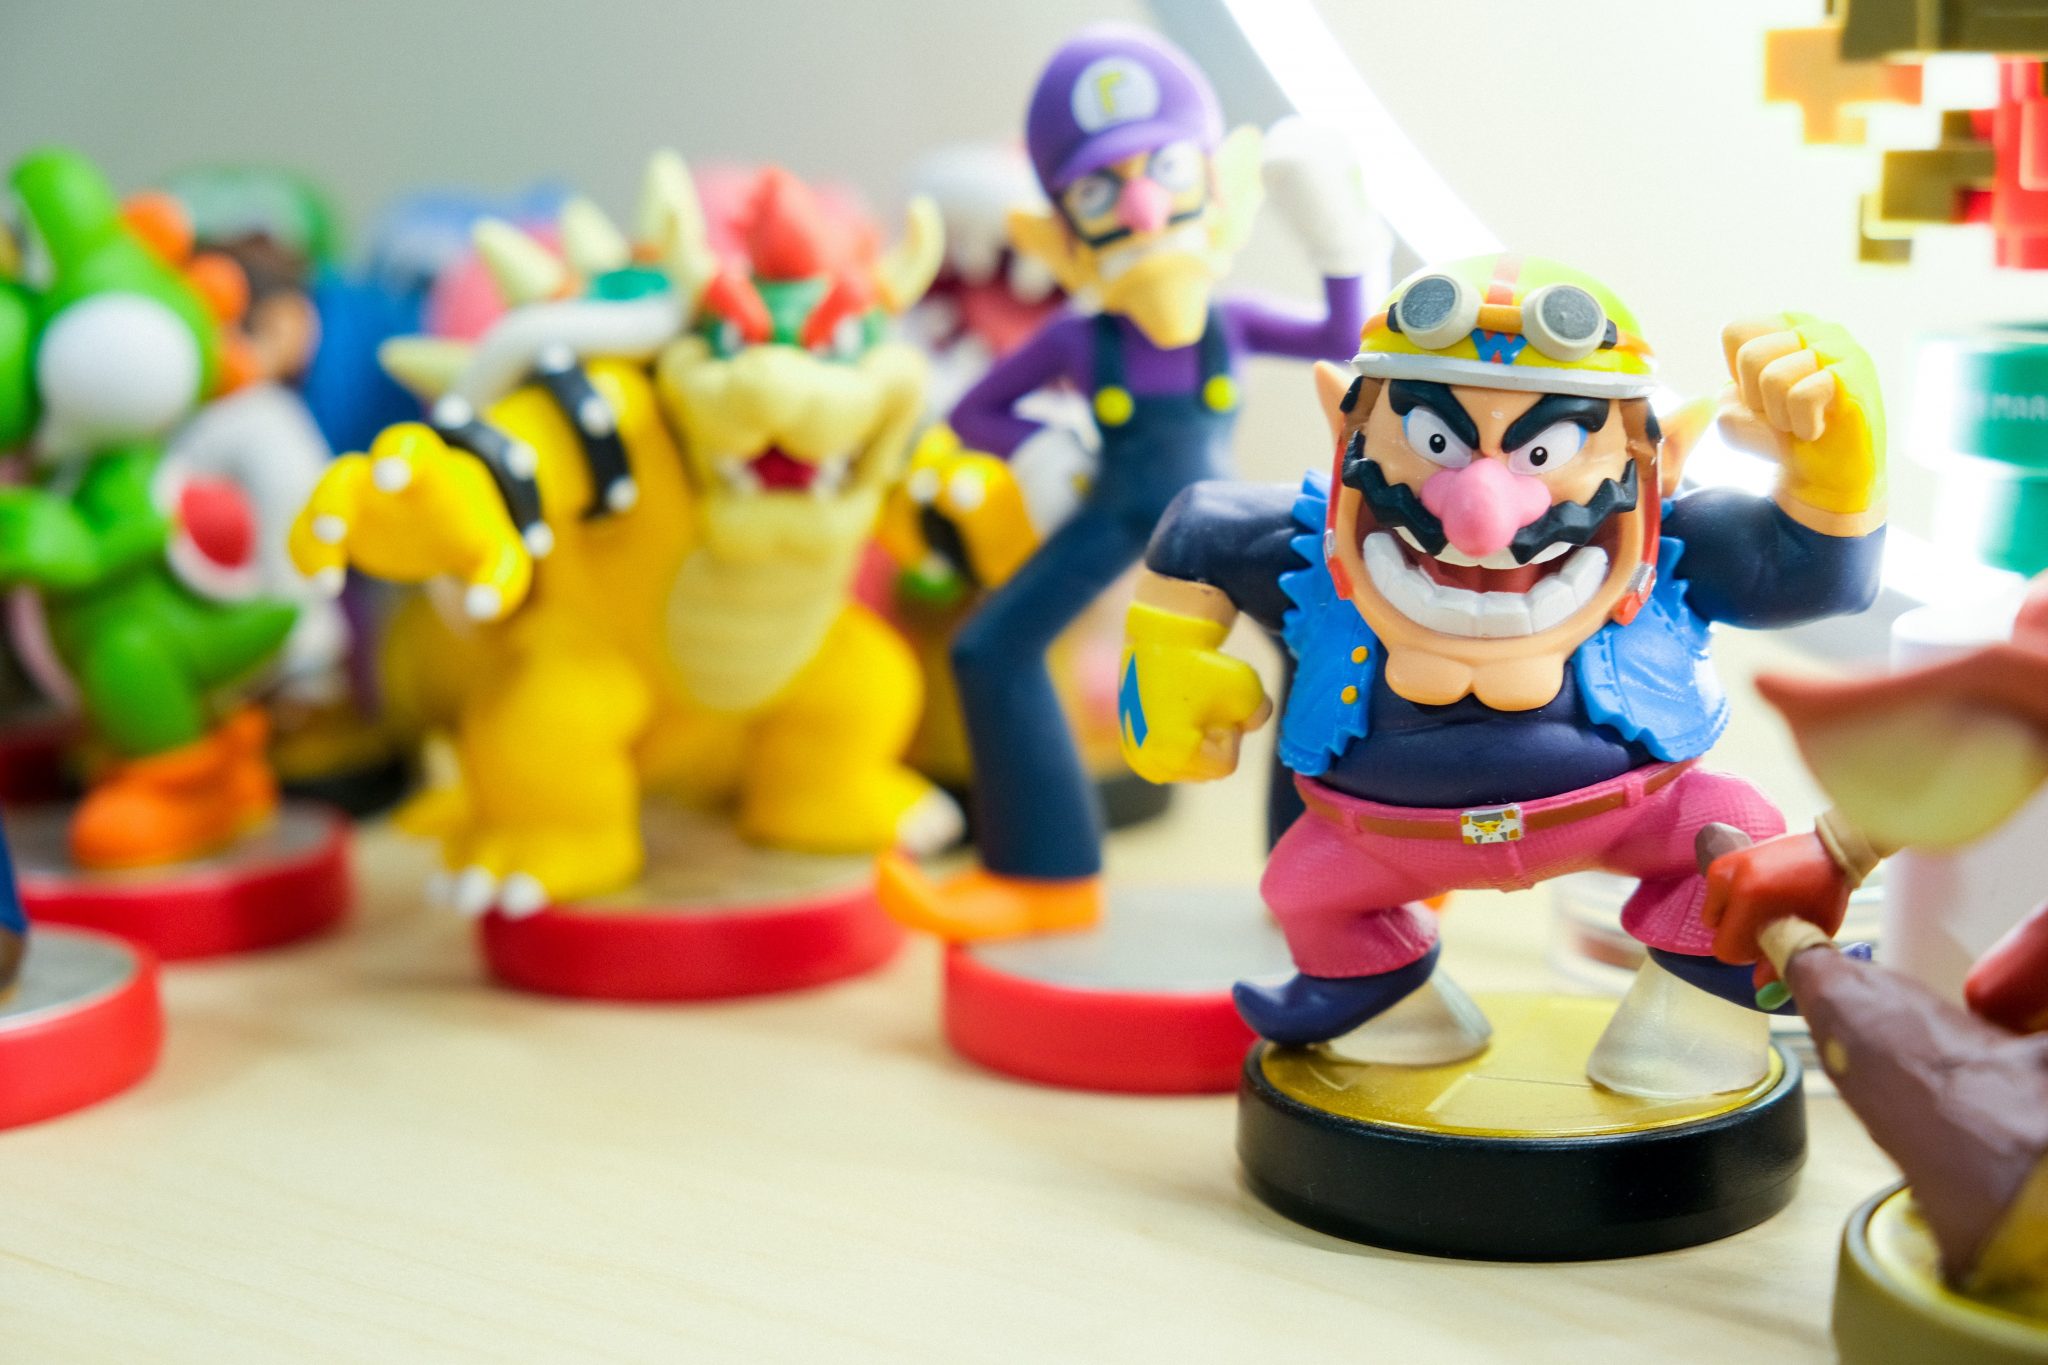 video games that use figurines